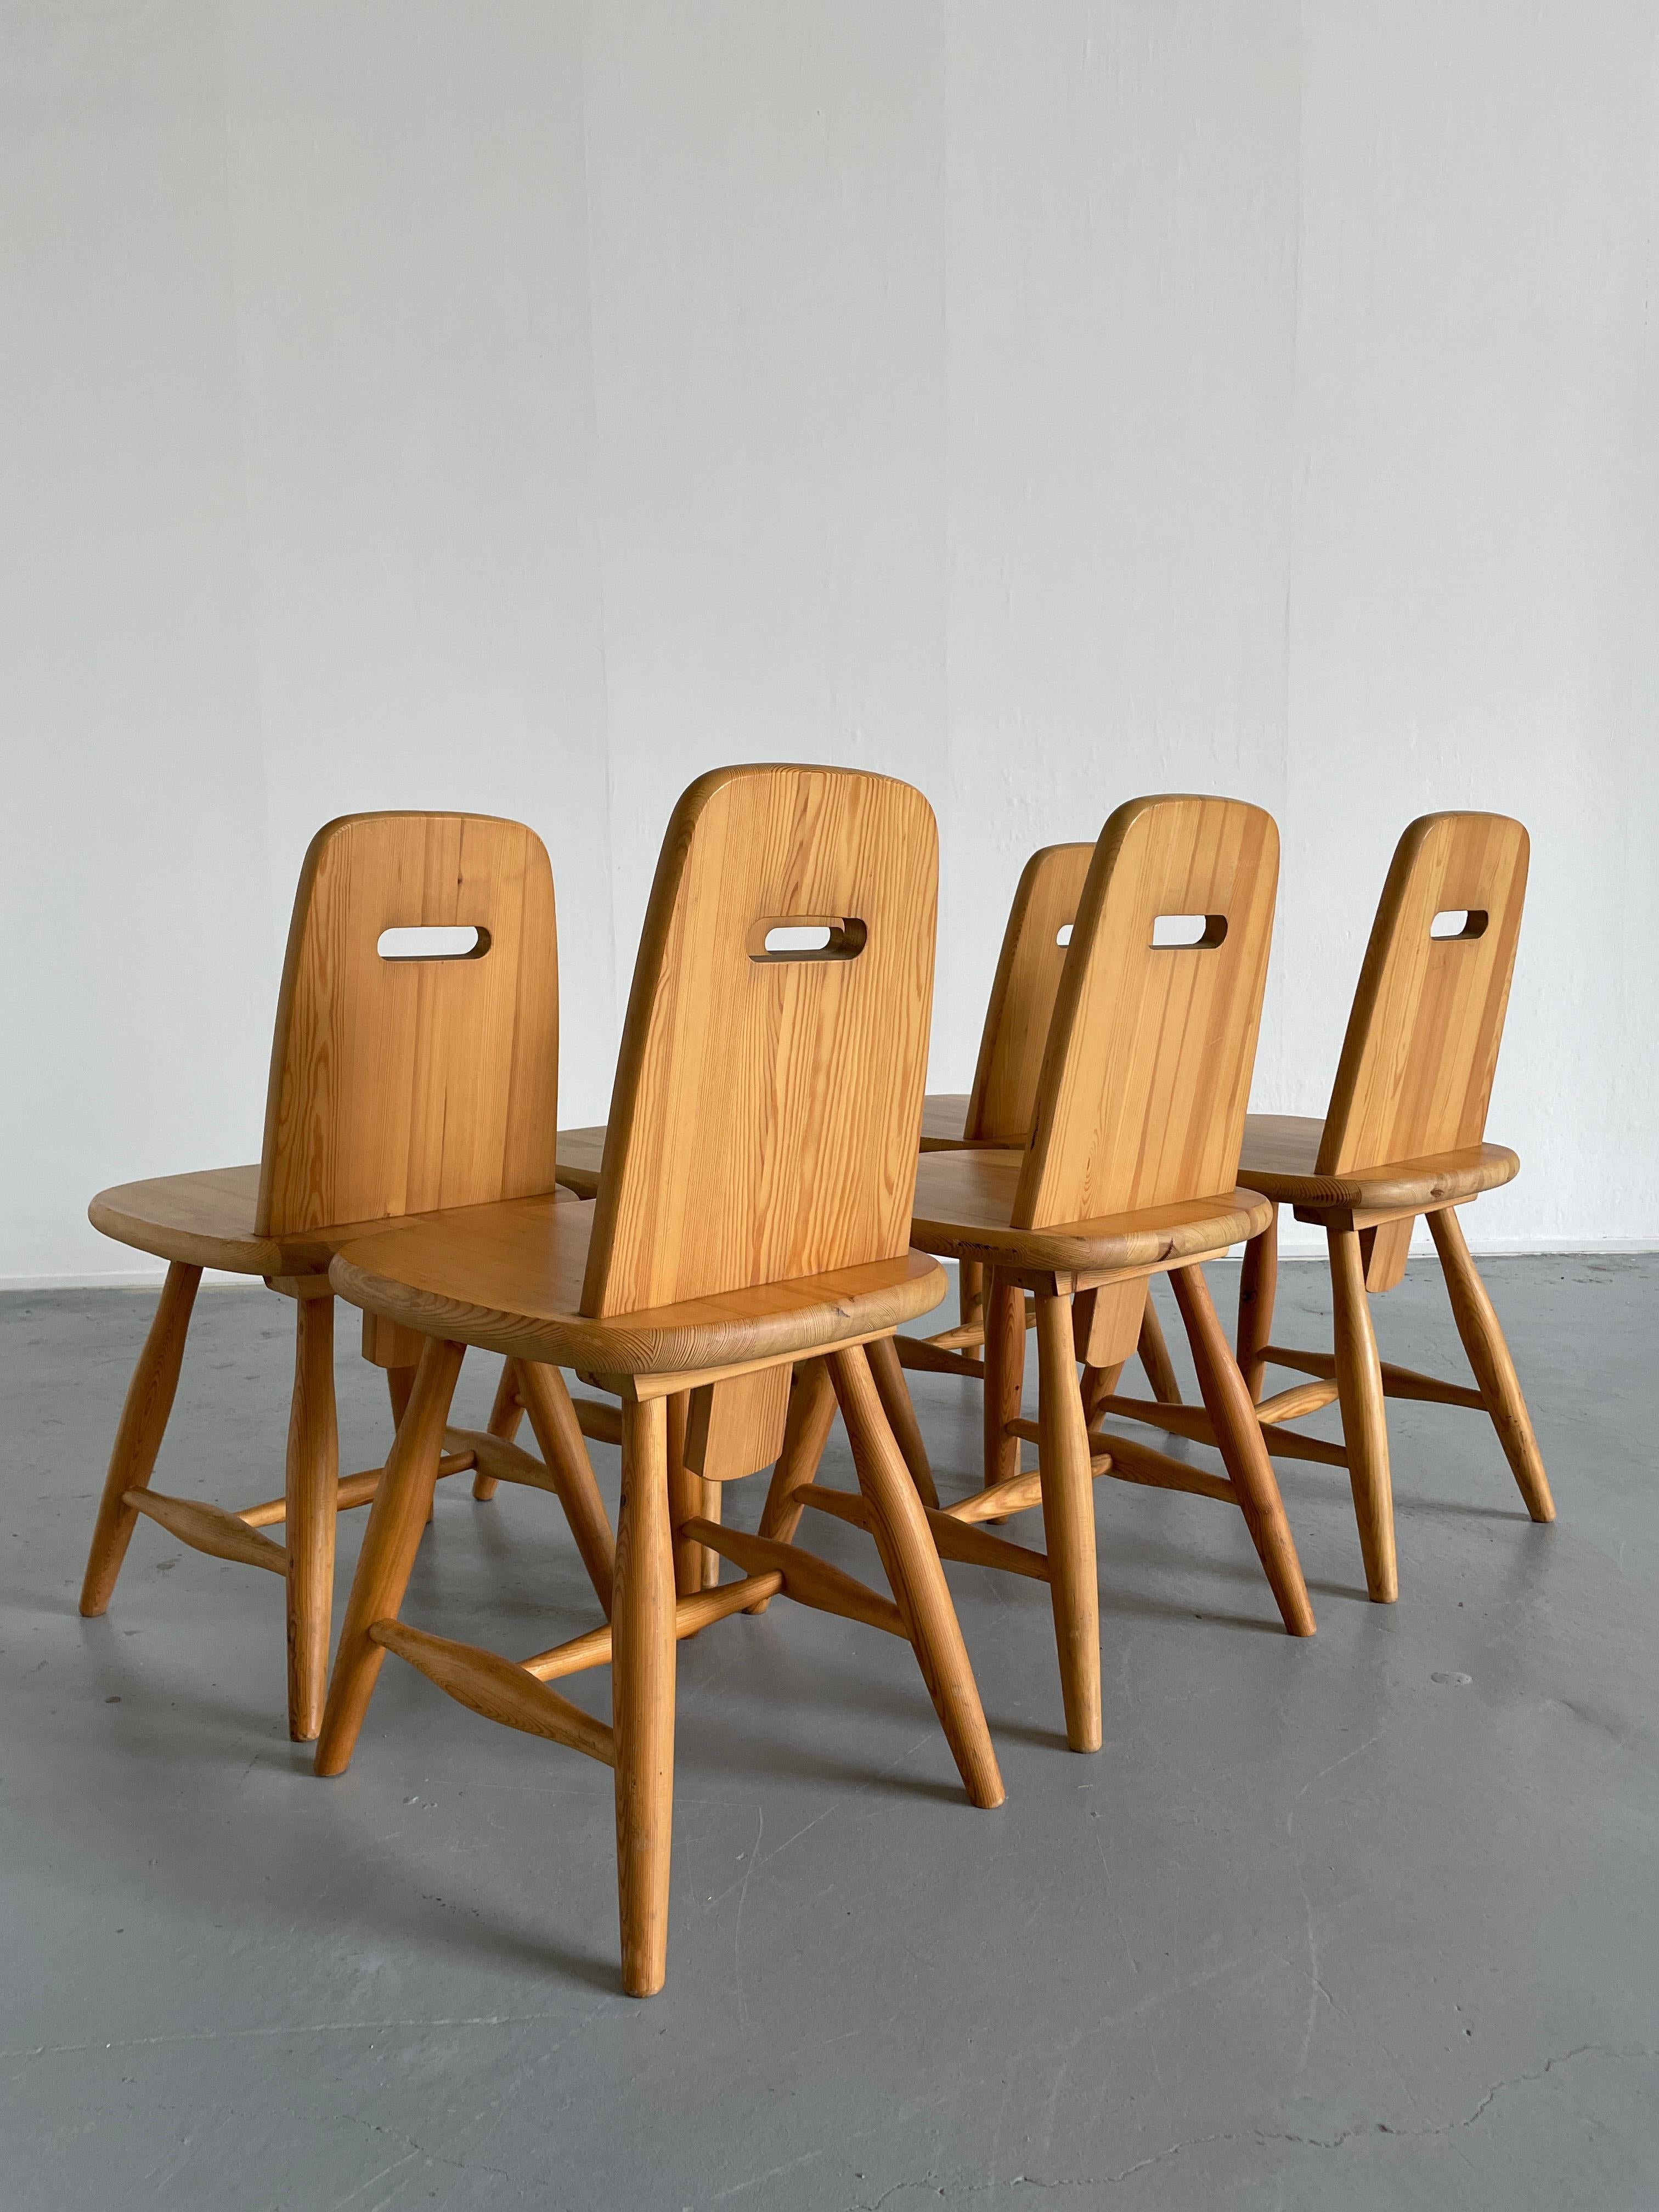 Set of 6 Eero Aarnio 'Pirtti' Wooden Dining Chairs in Solid Pine for Laukaan Puu 1